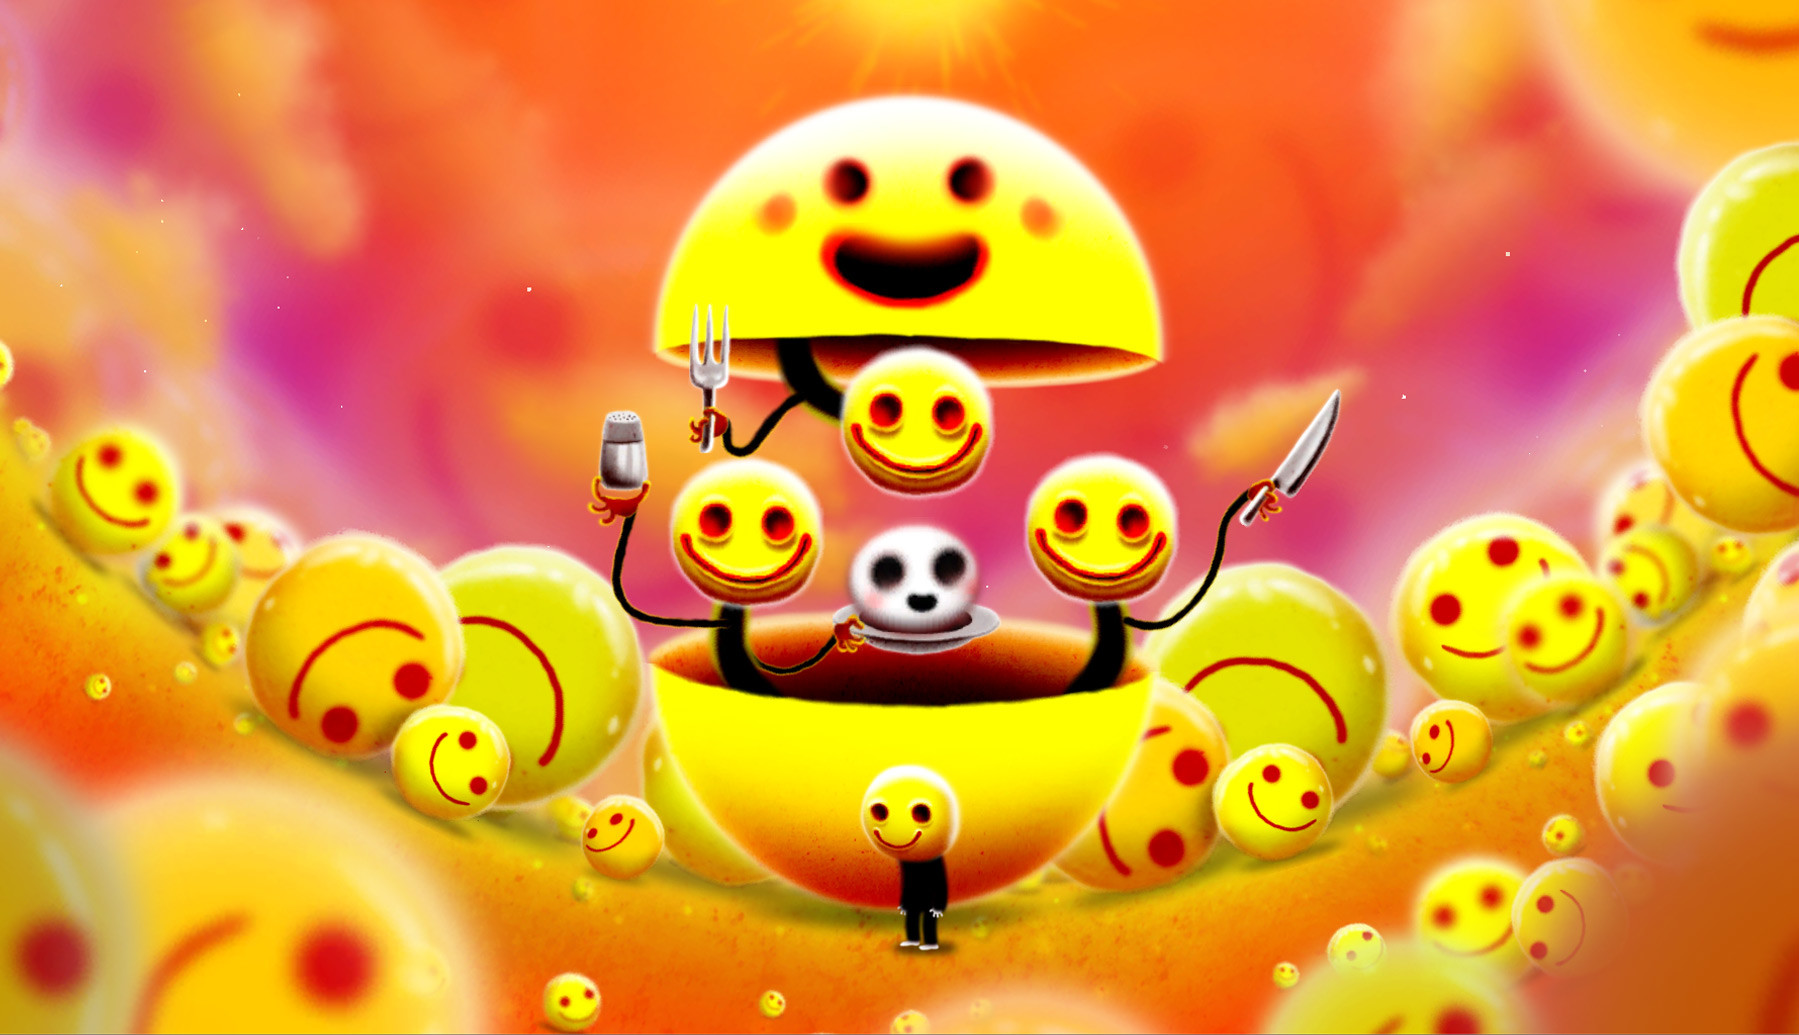 Happy Game Free Download